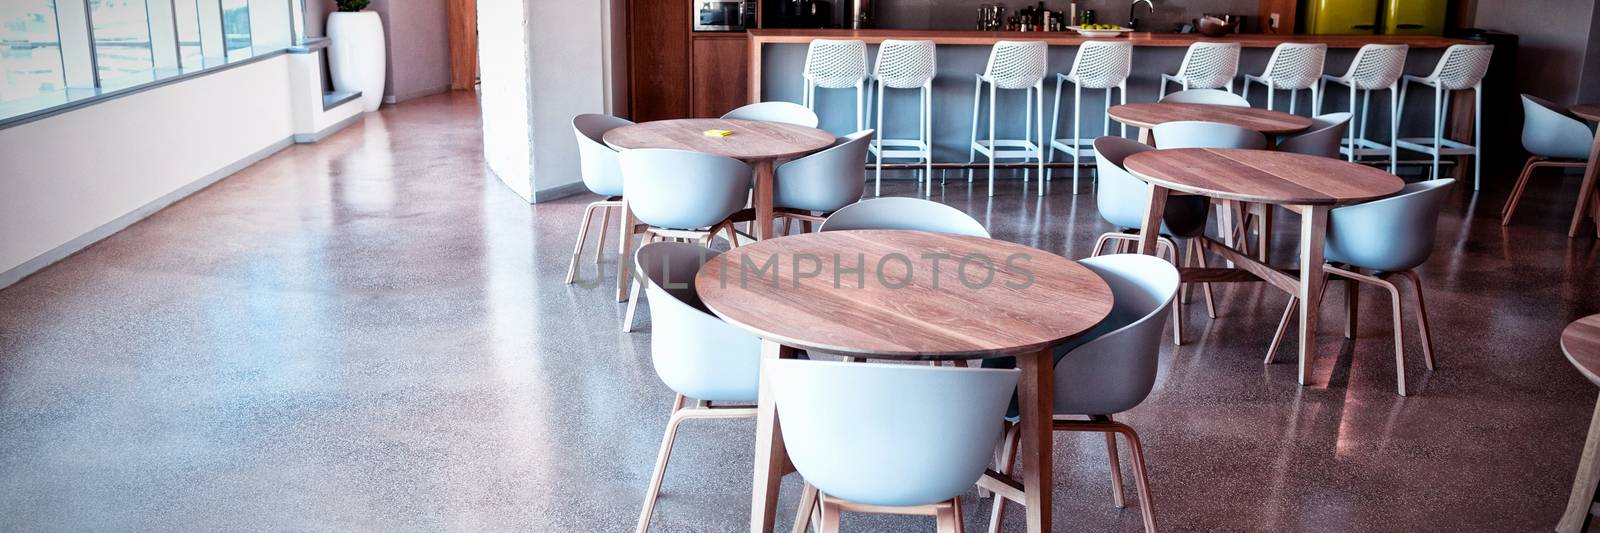 Empty chair and table in cafeteria by Wavebreakmedia